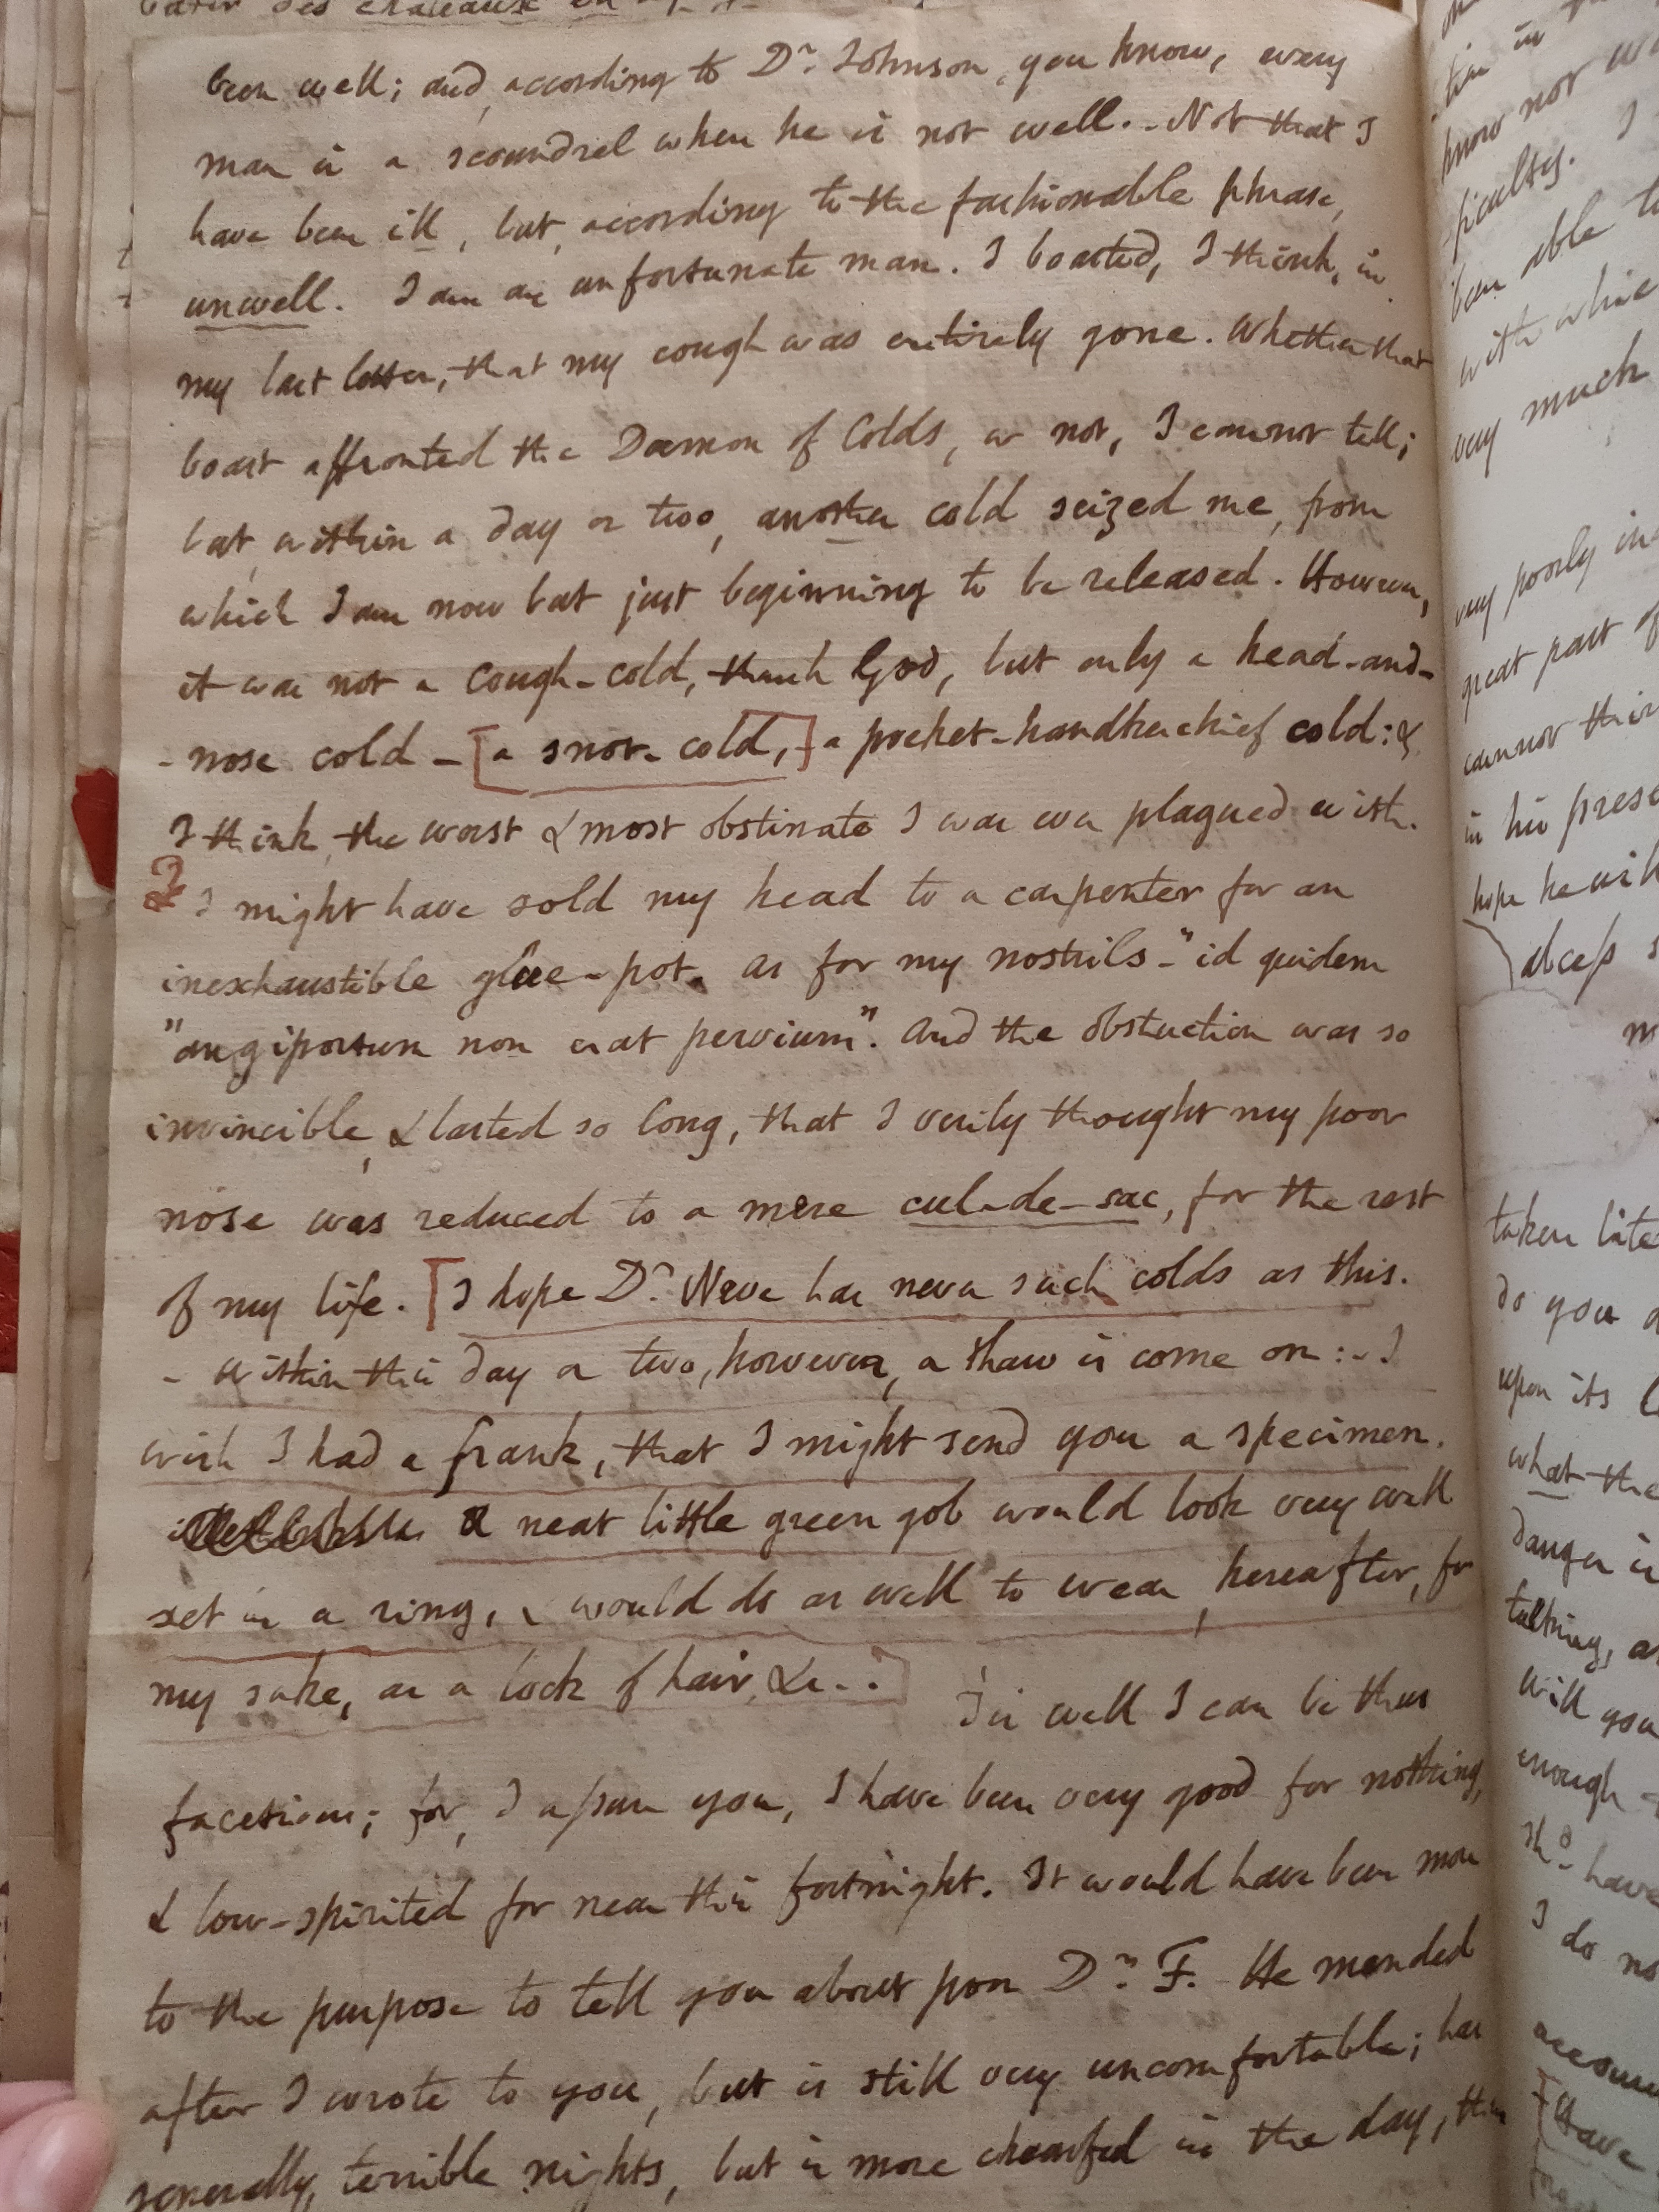 Image #2 of letter: Thomas Twining to Daniel Twining, 8 March 1790